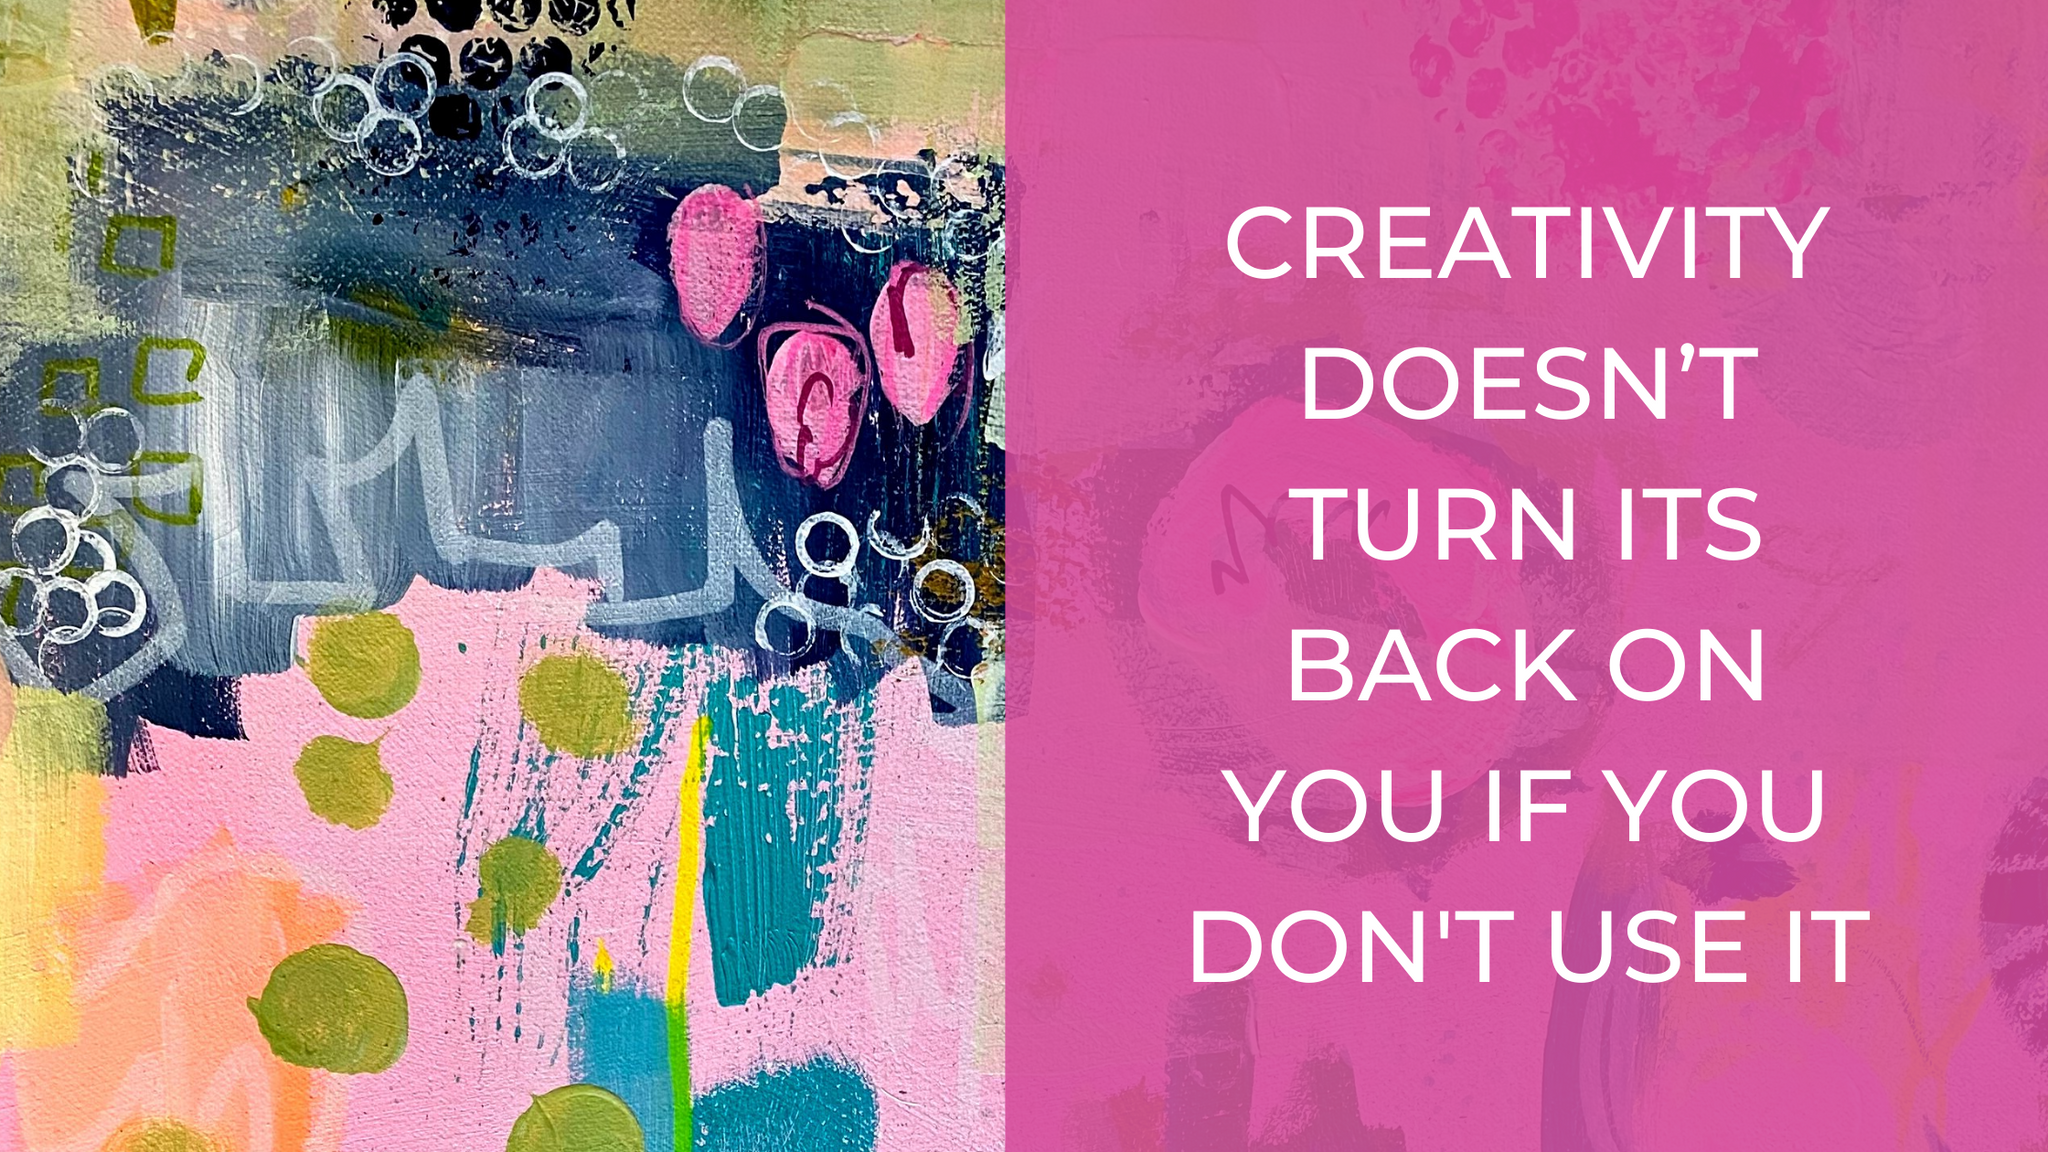 Creativity doesn’t turn its back on you if you don't use it